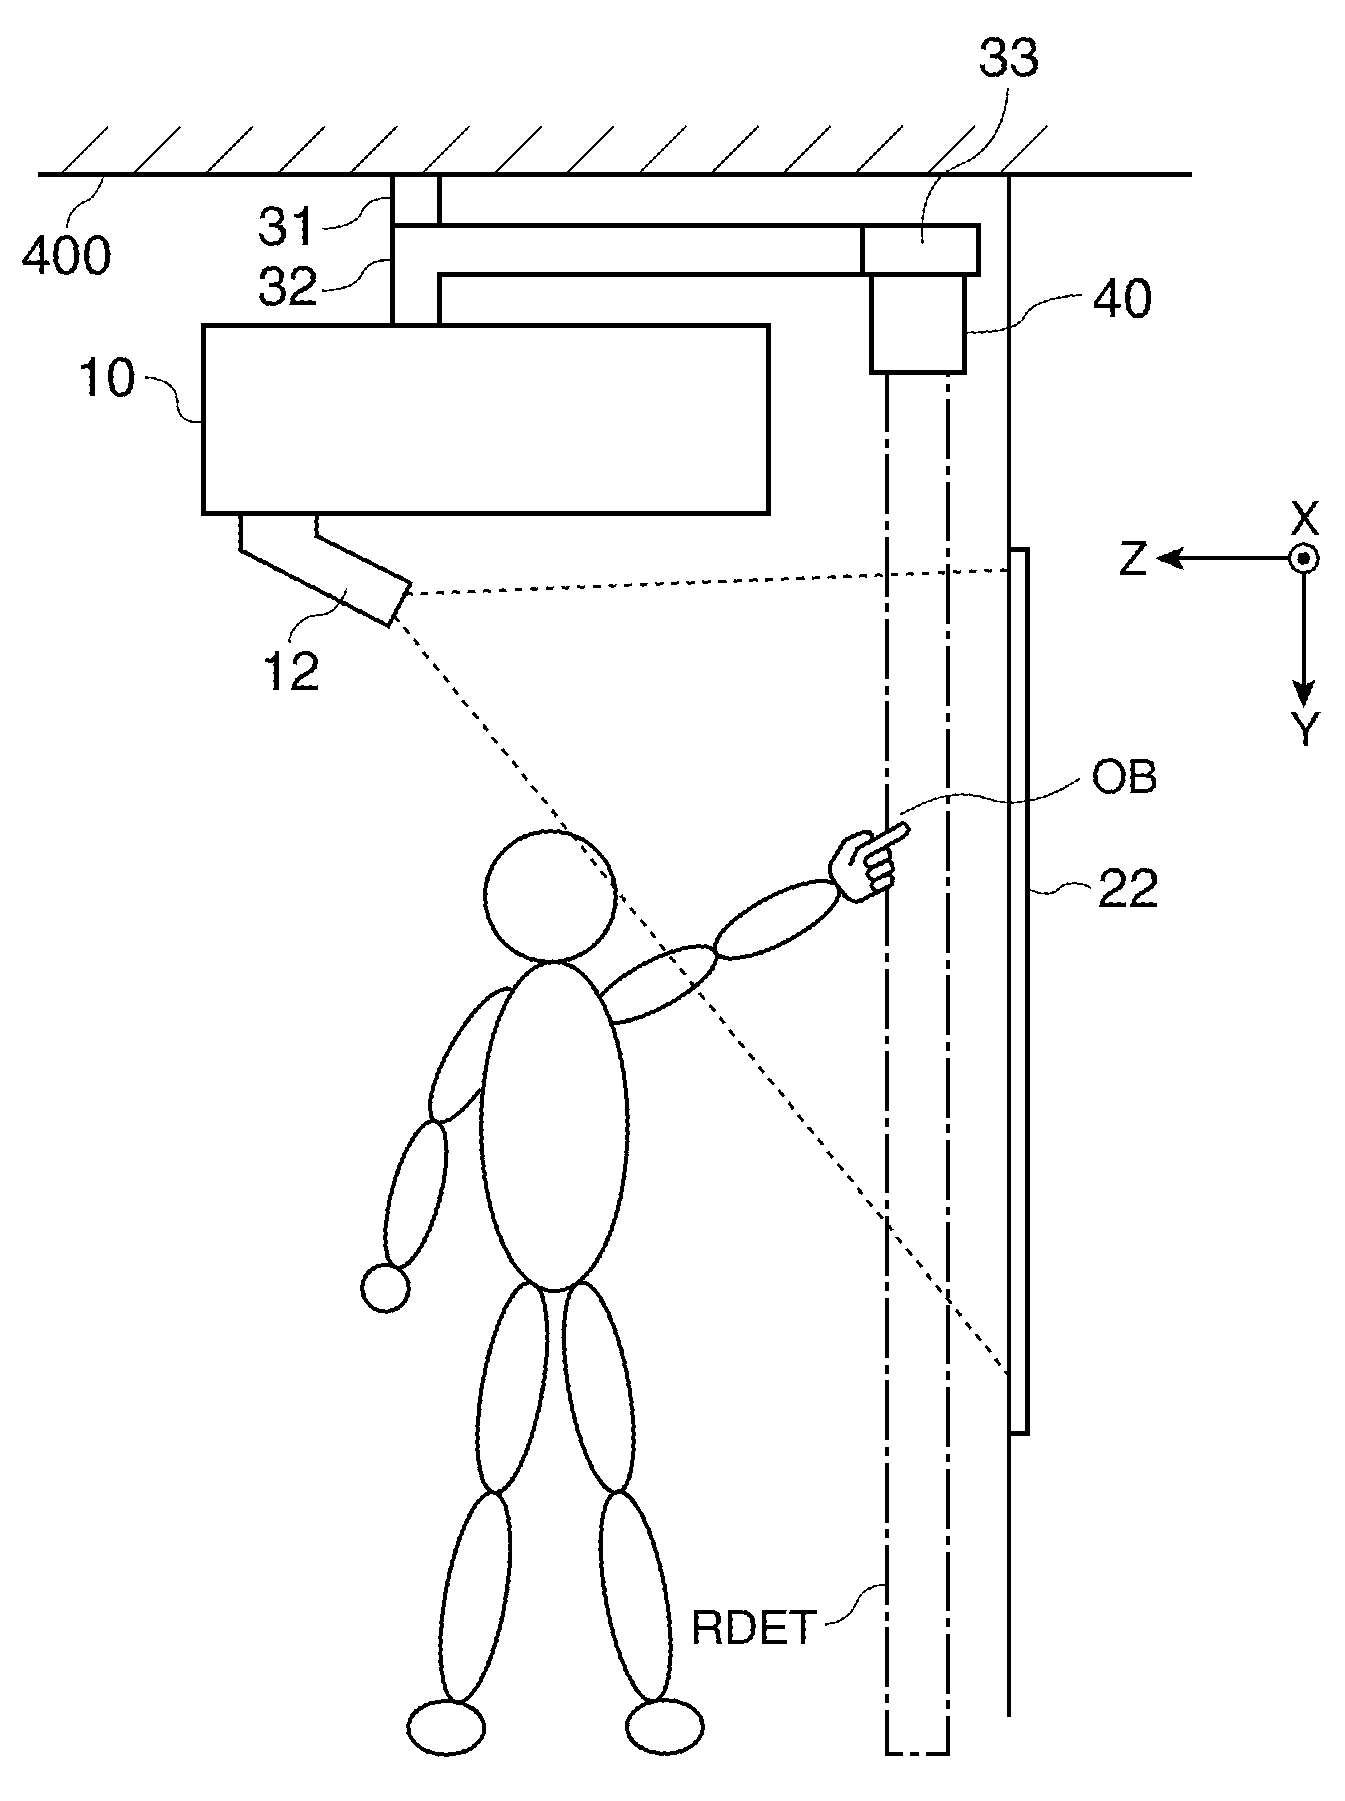 Projection display system and attaching device